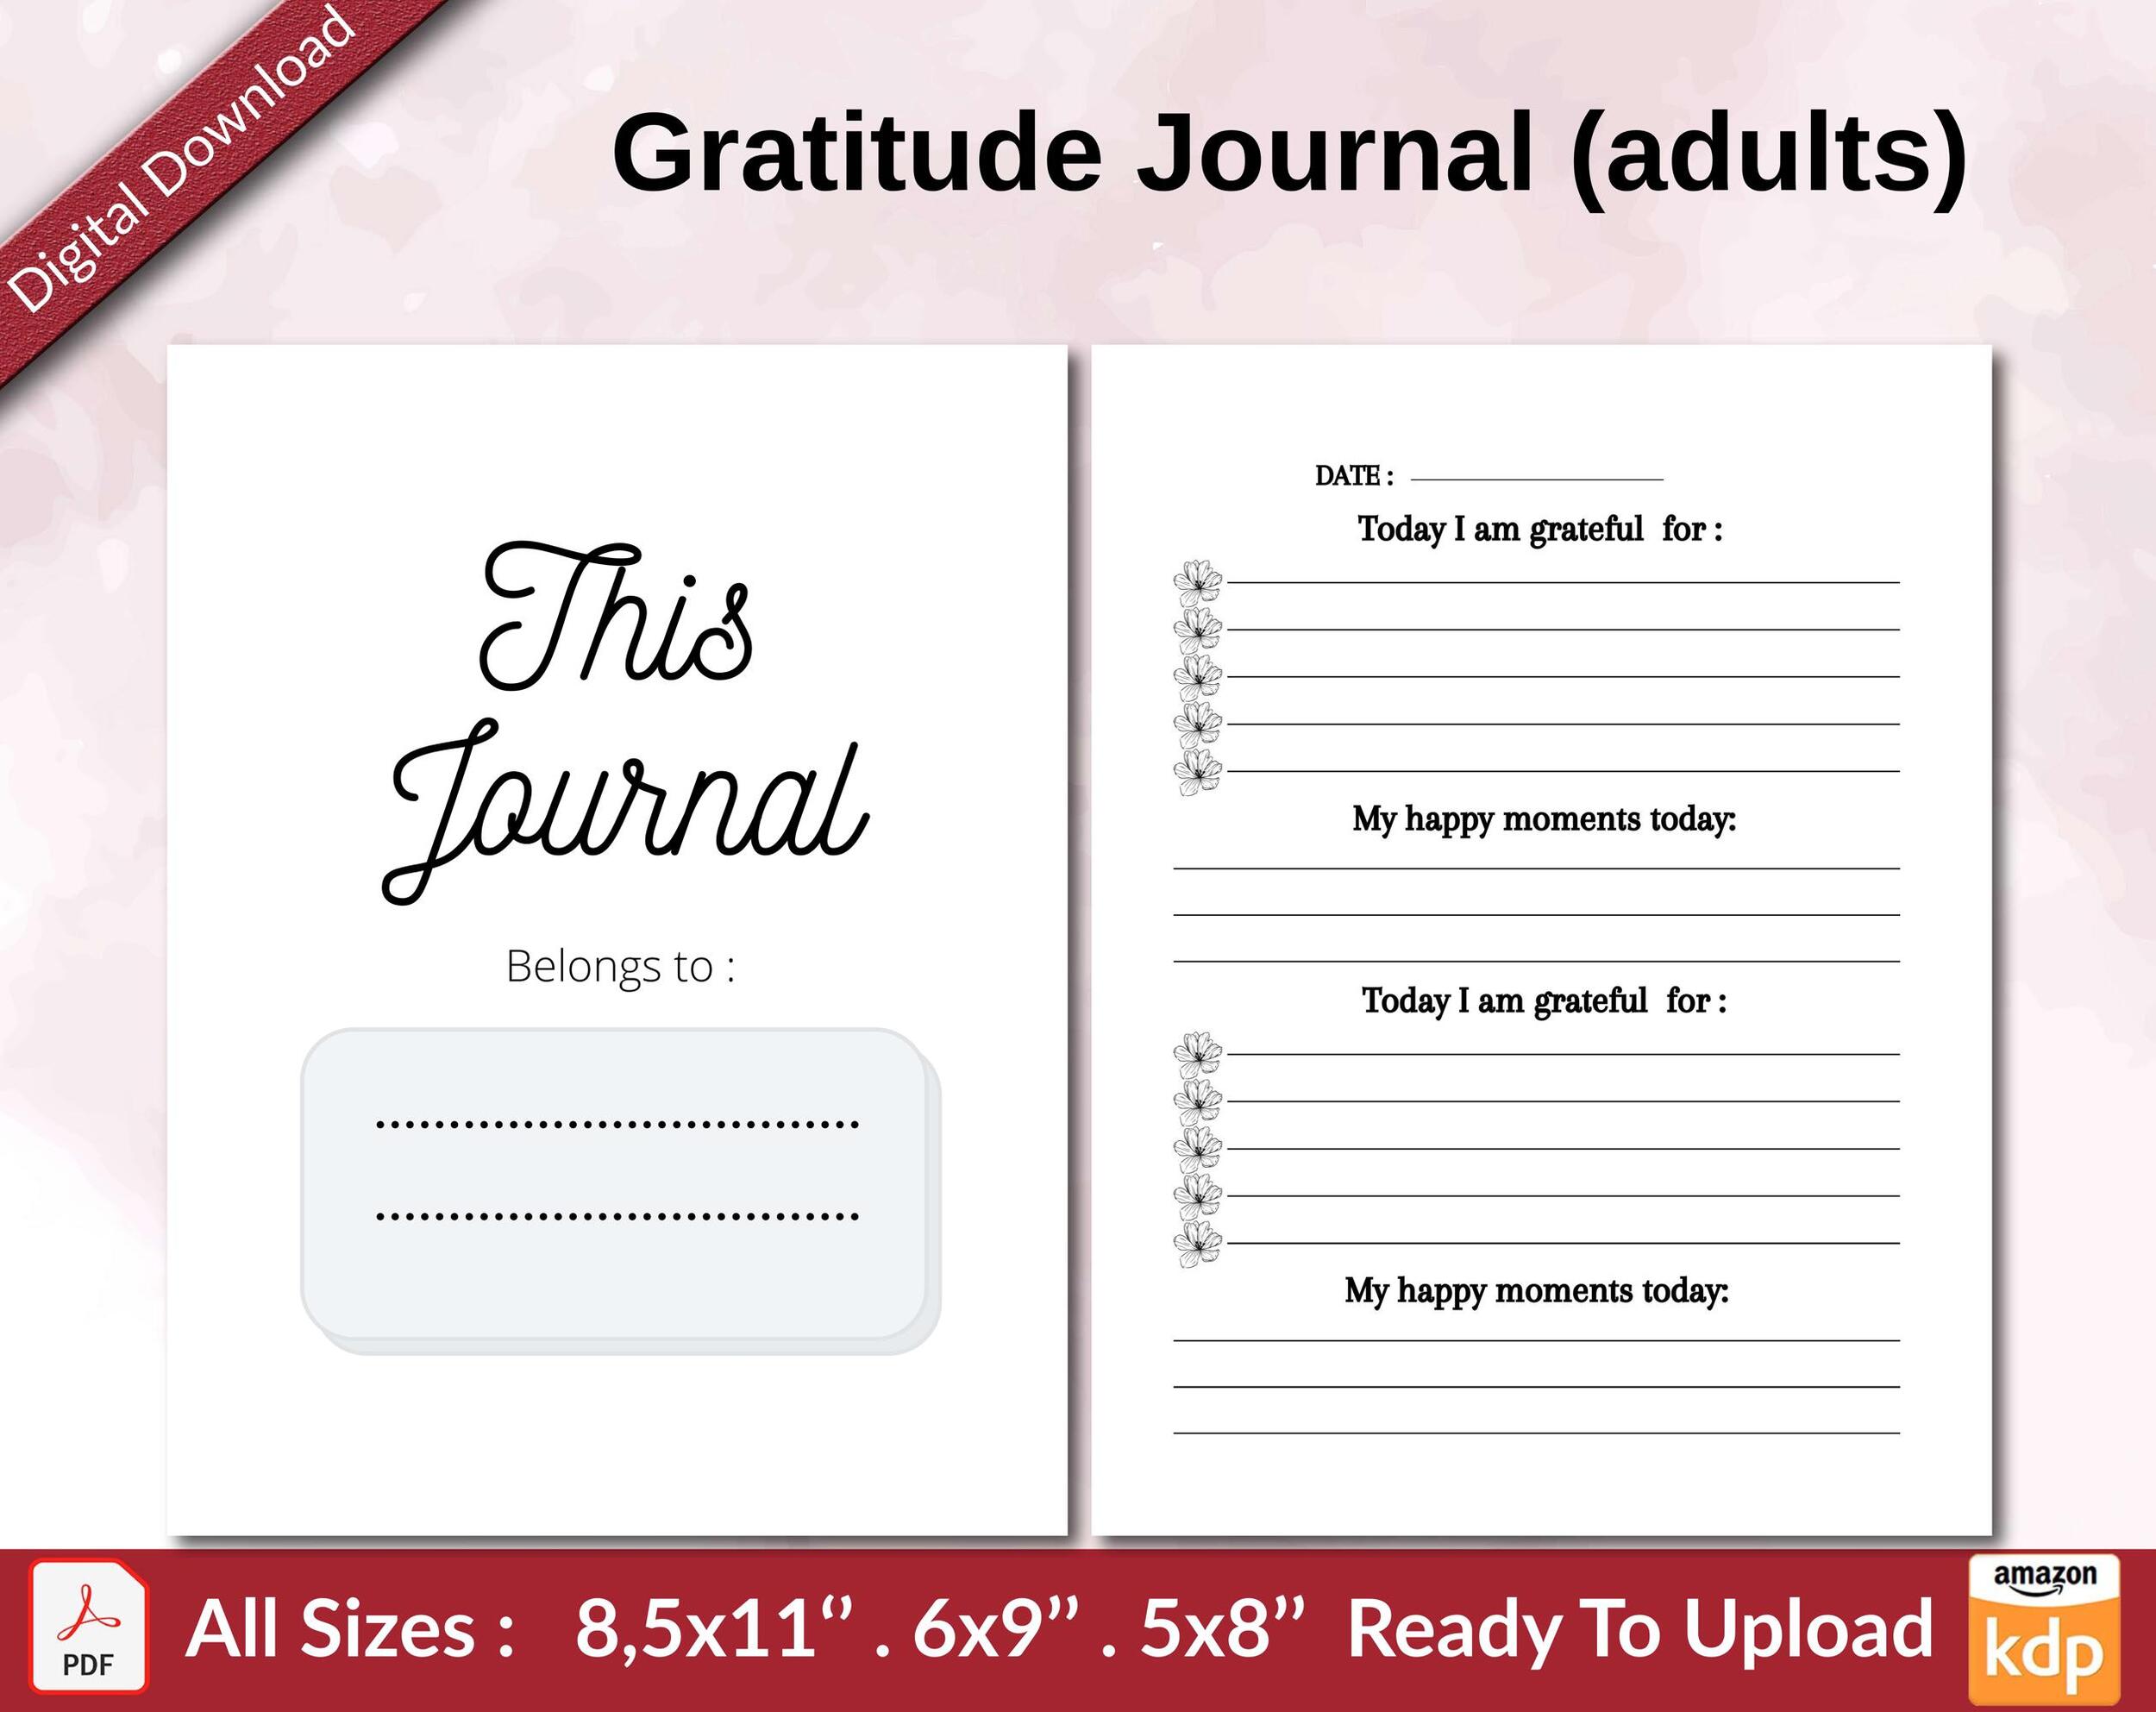 Size Mens Prayer Journal ready to publish Template for Low Content Books 6x9 SelfPublish Books KDP Interiors with bleed COMMERCIAL USE